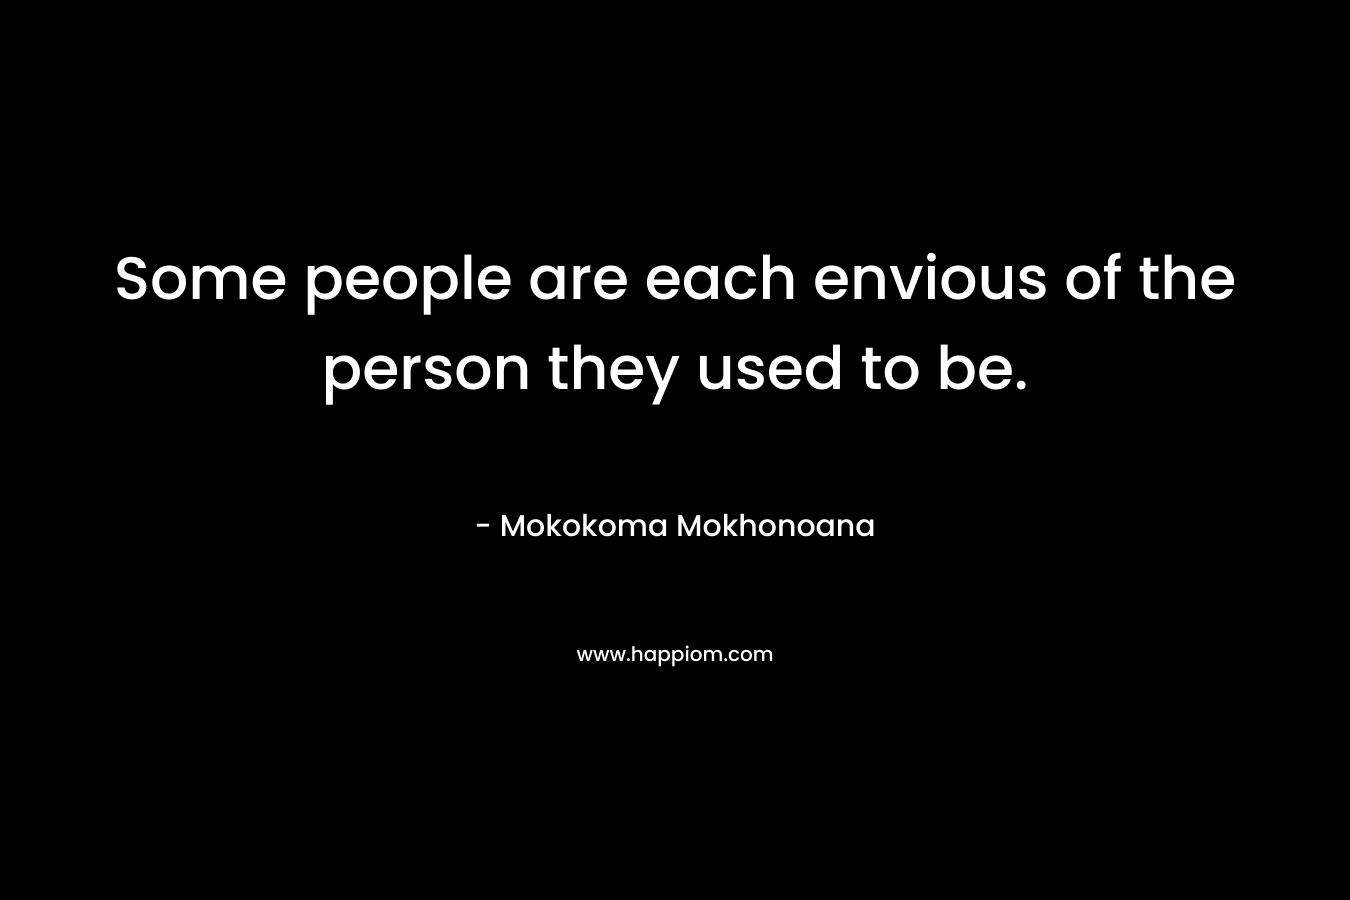 Some people are each envious of the person they used to be.